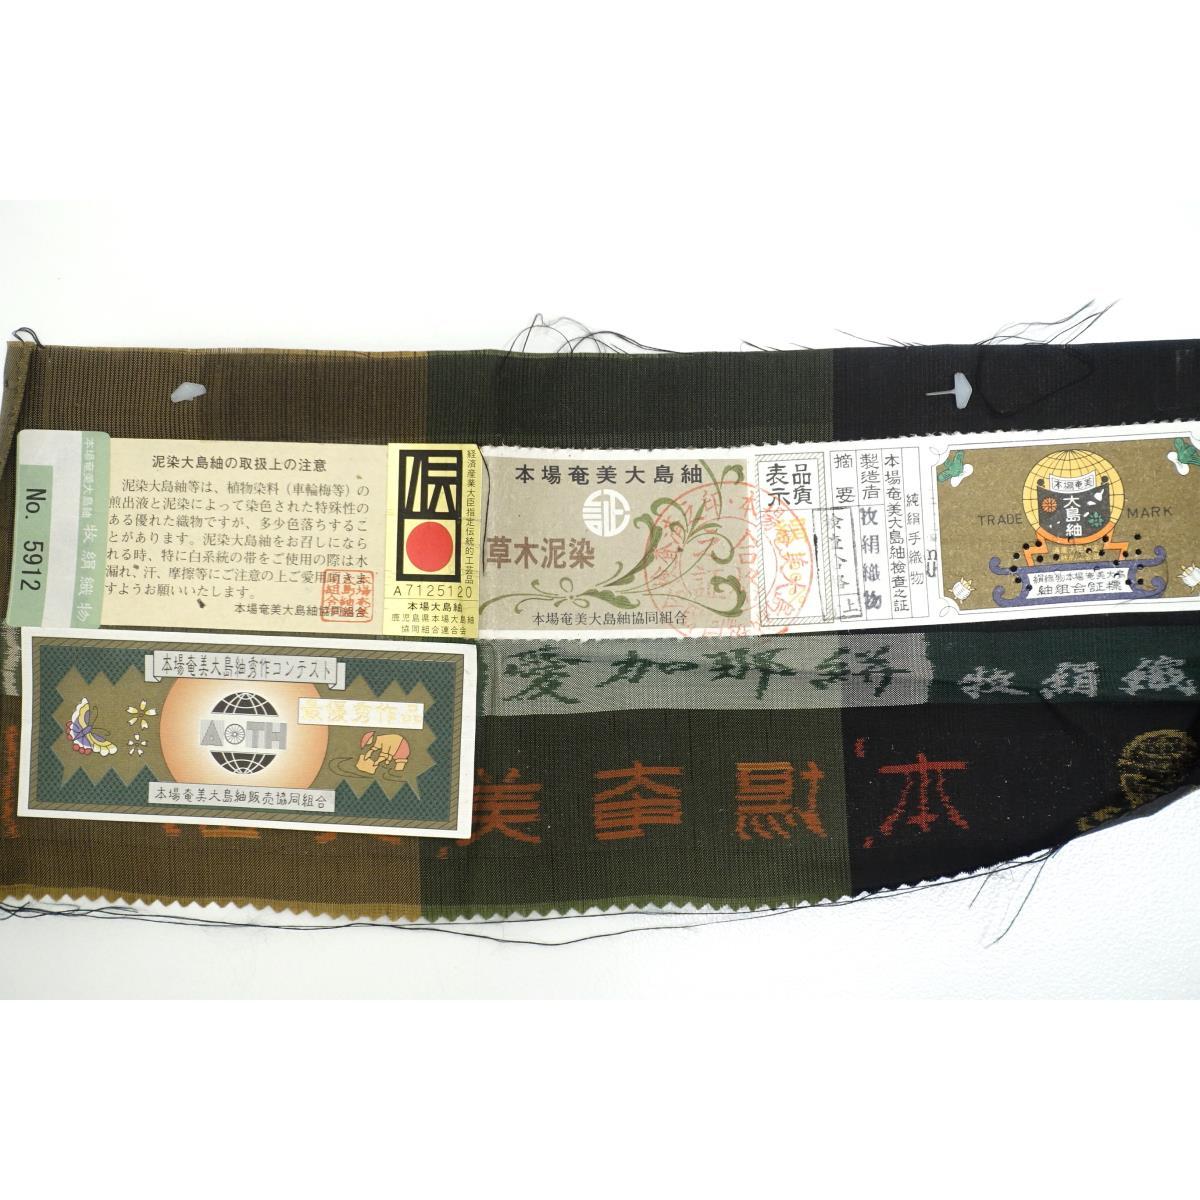 [Unused items] Authentic pongee, Amami Ooshima Tsumugi pongee with certificate stamp, Shichimaruki, body cut, body width 2L size